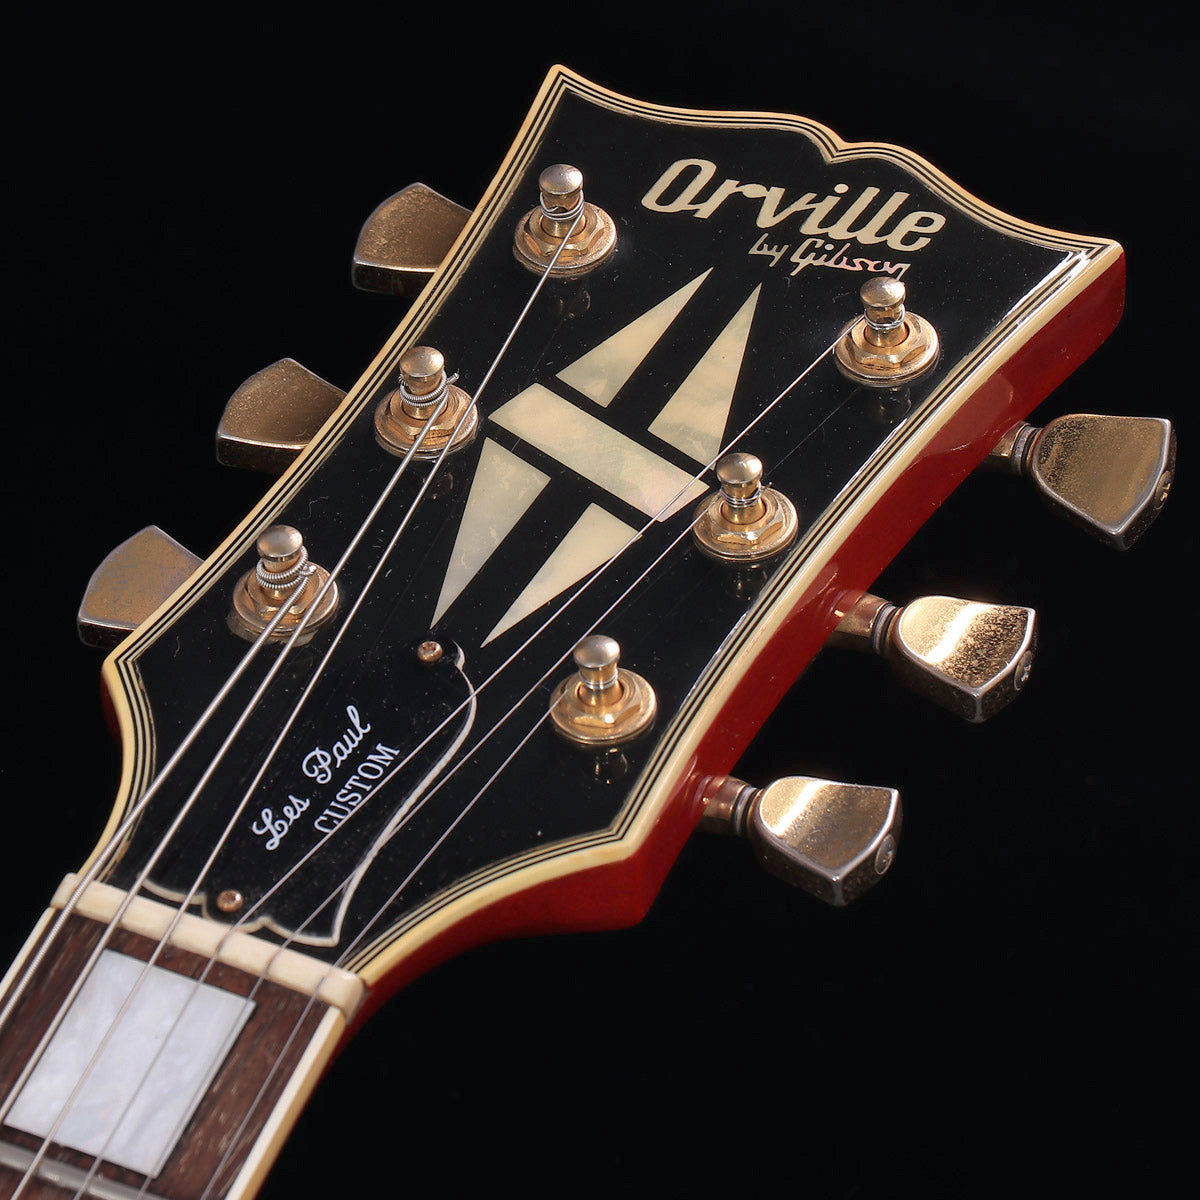 [SN G105070] USED Orville by Gibson / LPC/Les Paul Custom TR/Trans Red [1991/4.28kg] Orville Les Paul Electric Guitar [08]